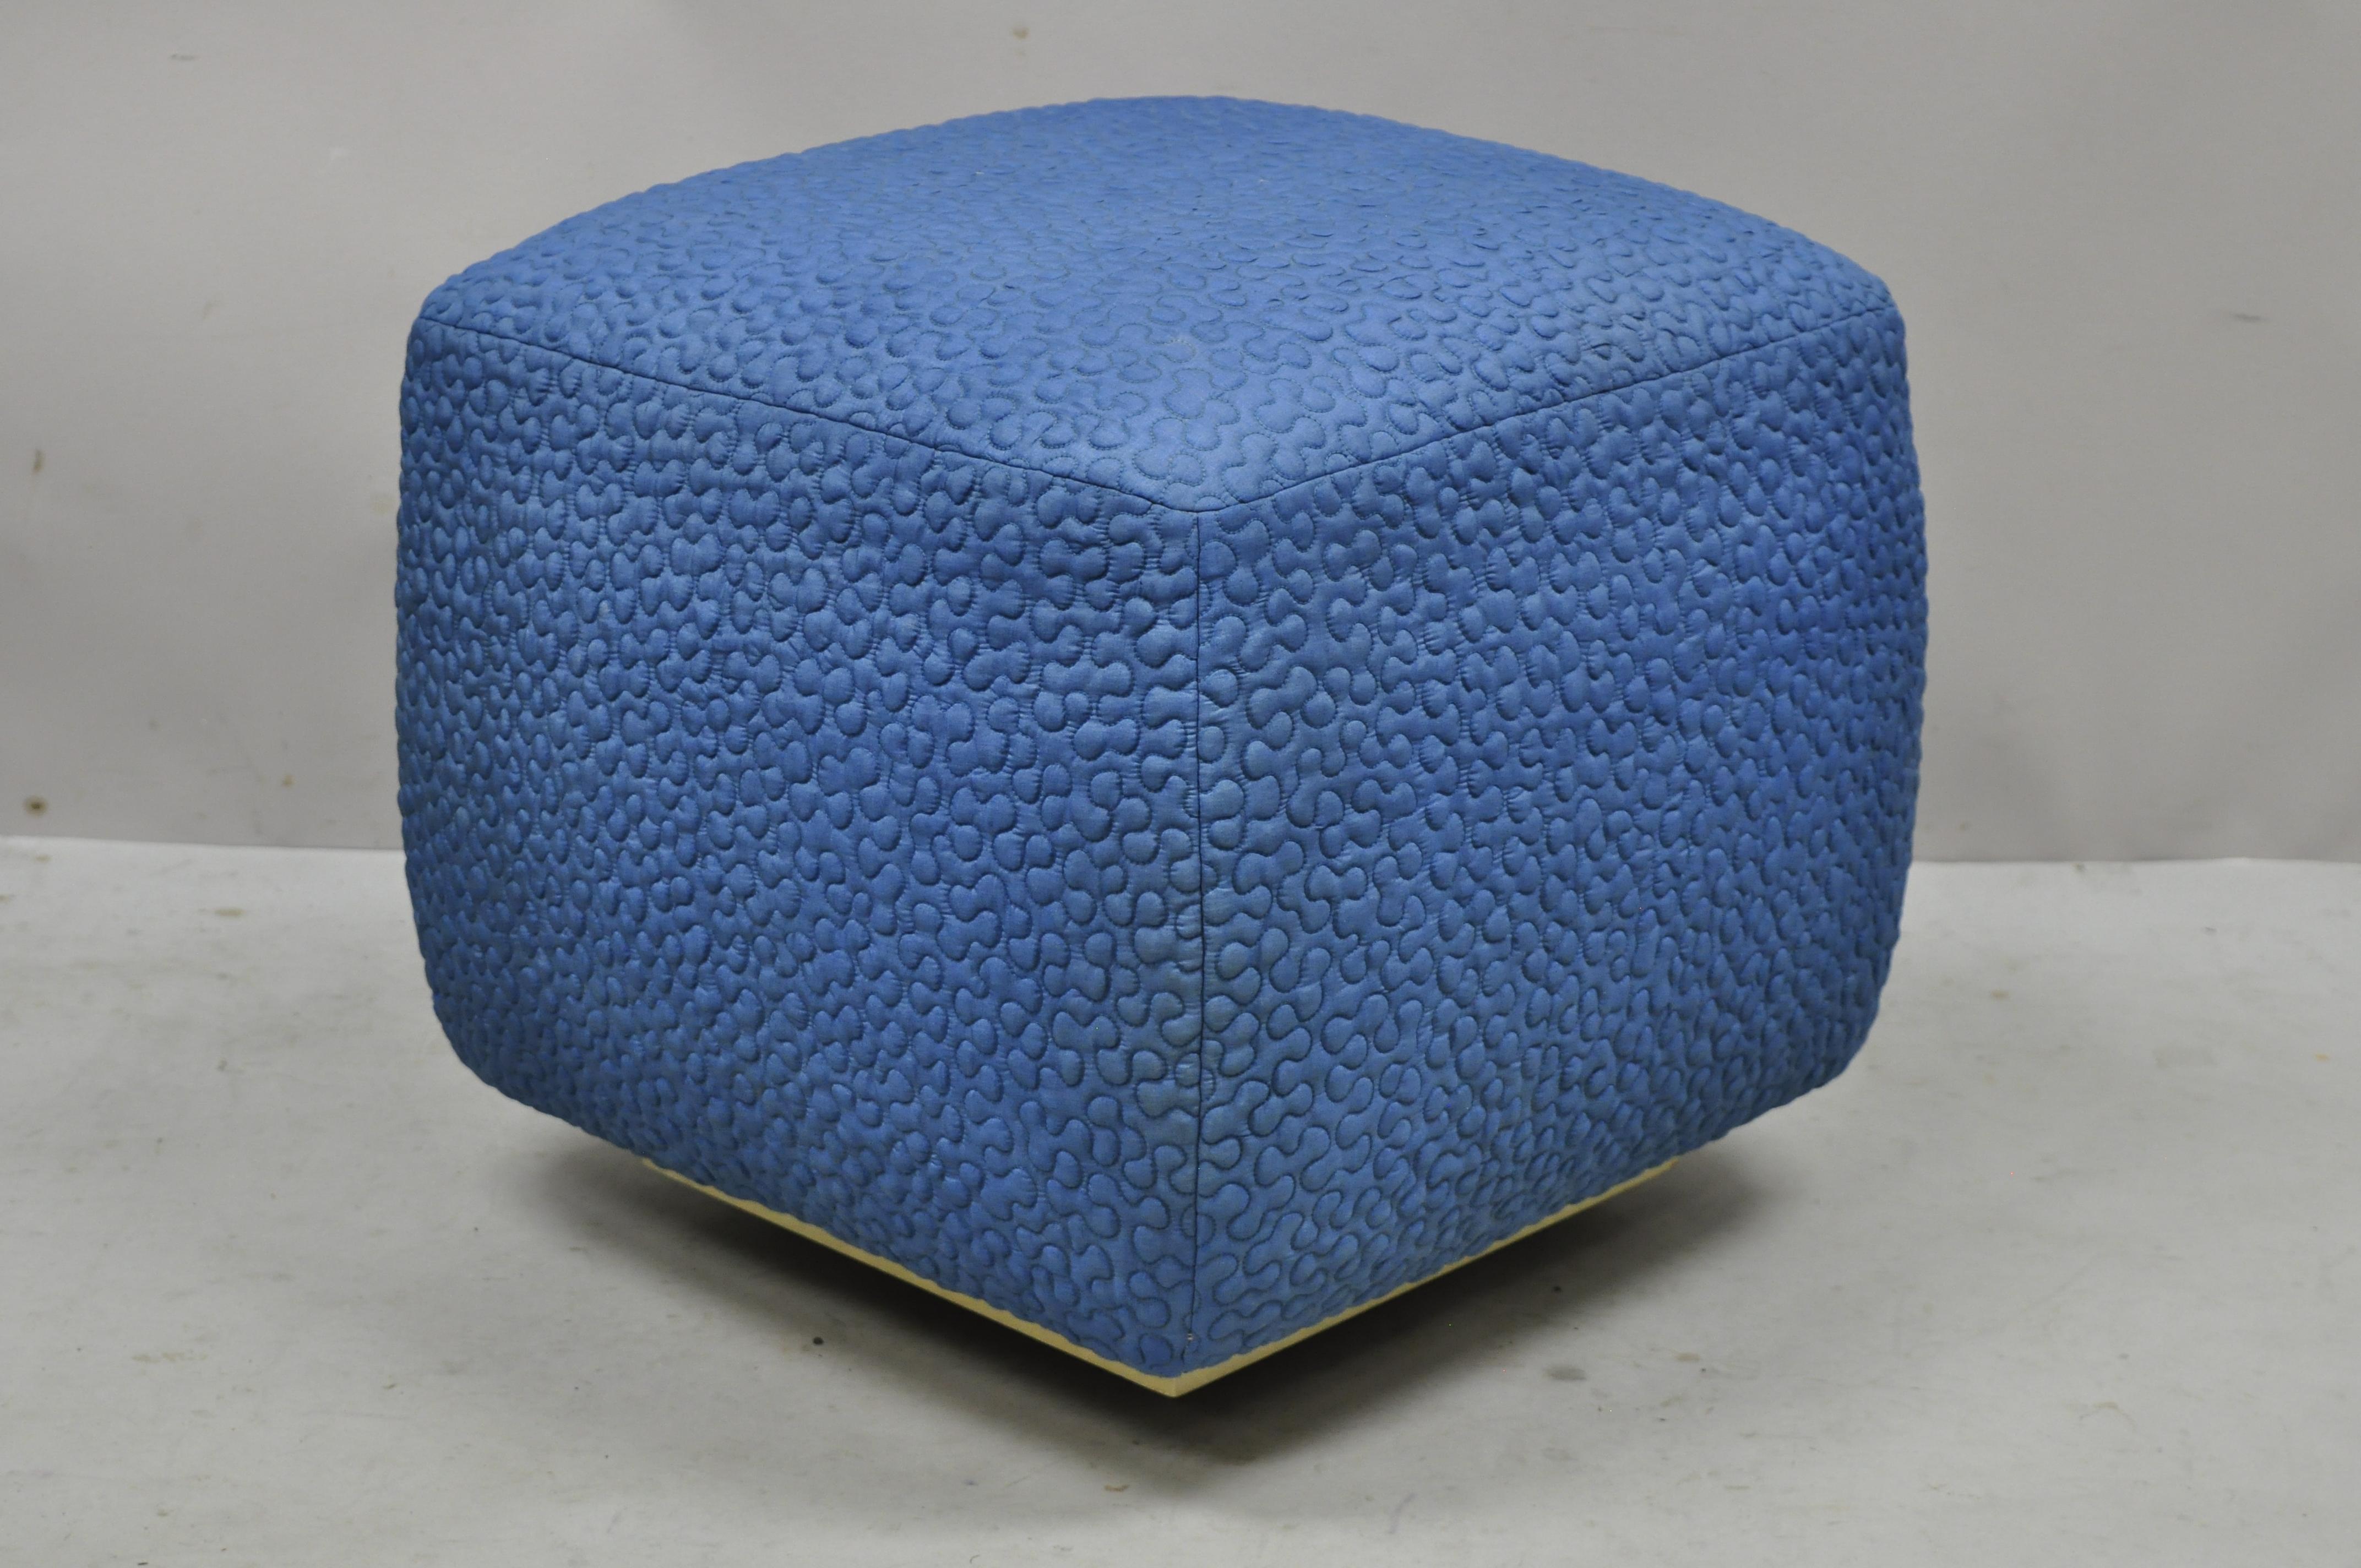 Vintage 1960s square pouf ottoman blue stitched fabric rolling casters wheels. Item features original blue stitched 1960s fabric, wooden plinth base with rolling casters, solid wood frame, very nice vintage item, clean modernist lines, quality